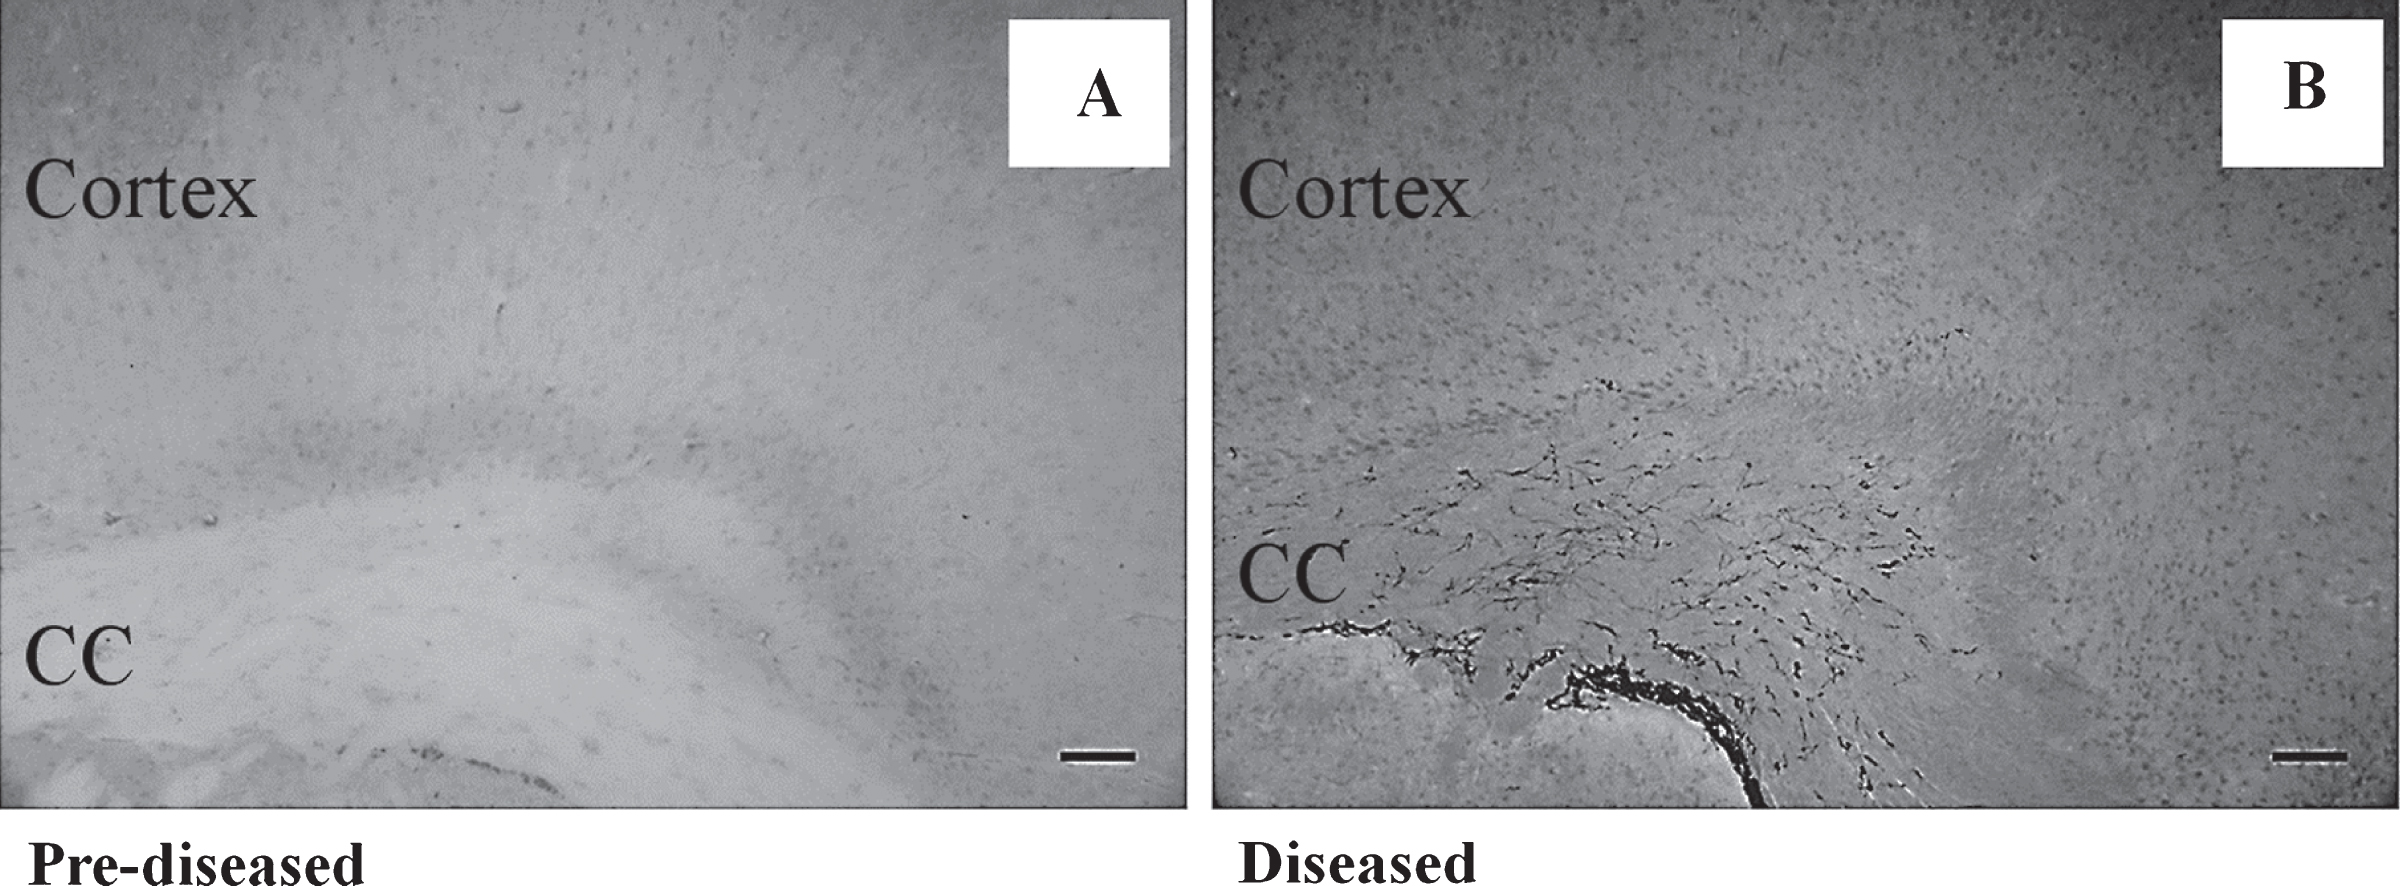 No DCX+ cell was found in the cortex of the pre-diseased mice and the diseased mice Representative images showing no DCX+ cell was found in the cortex of (A) the pre-diseased mice and (B) the diseased mice; scale bar: 100 μm.